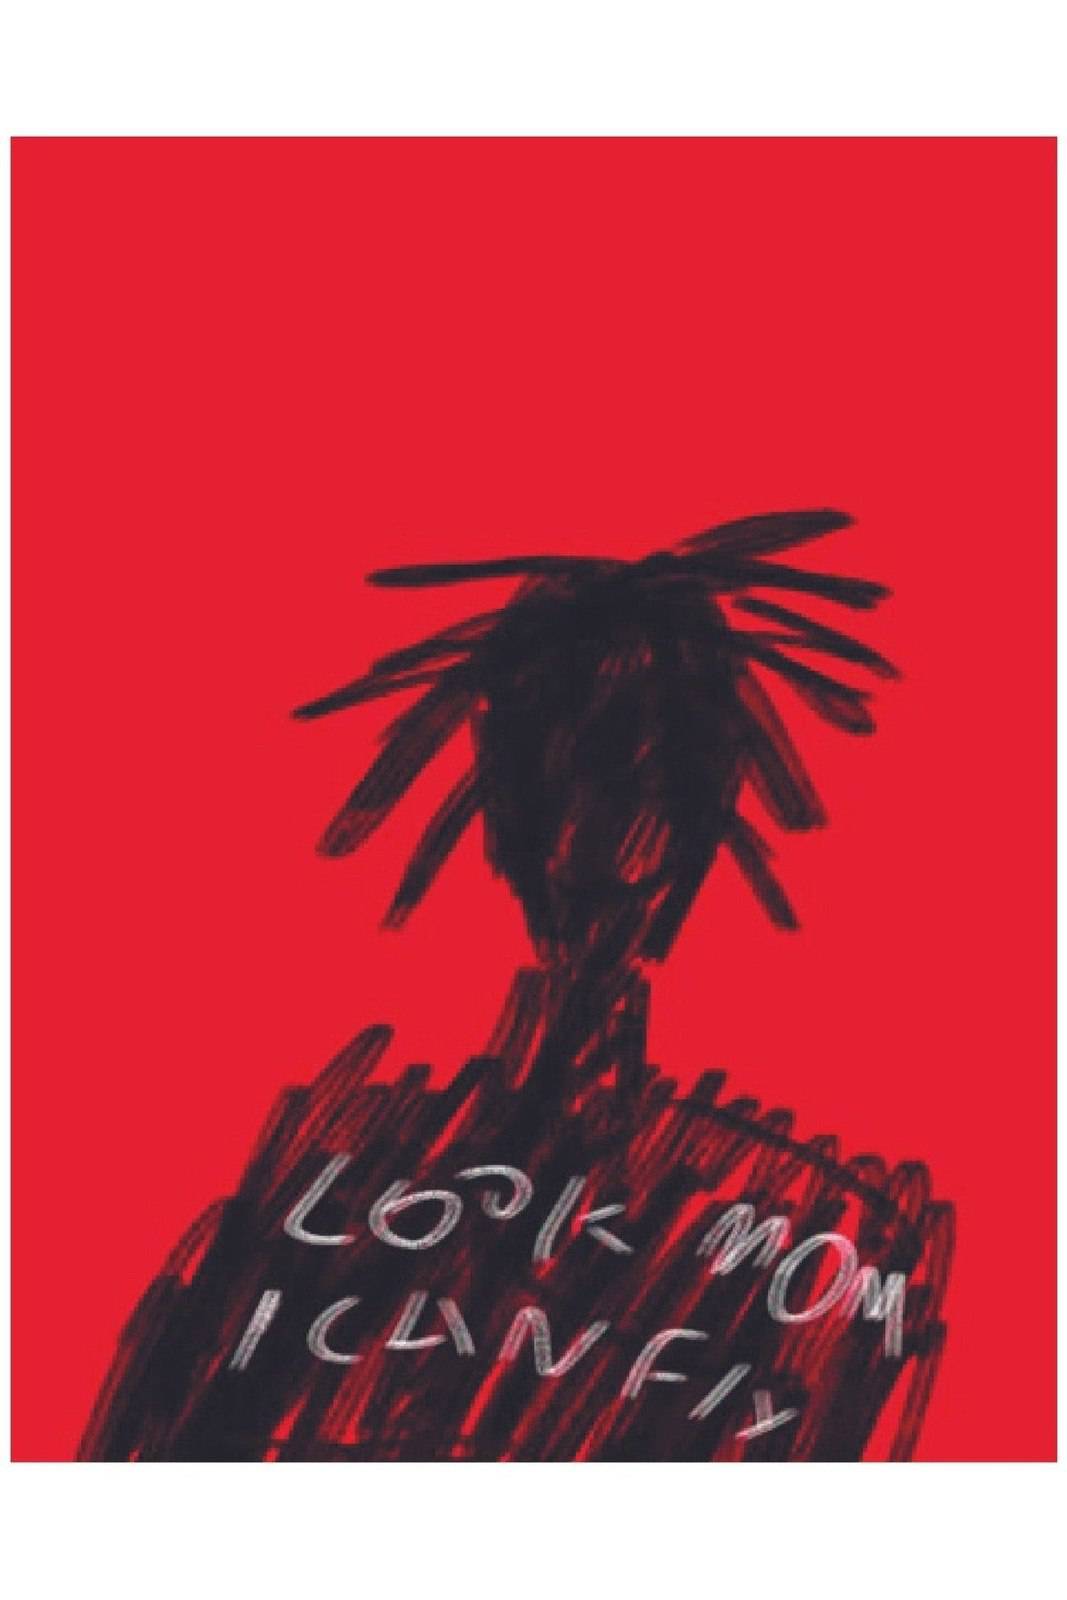 LOOK MOM IN RED POSTER - PosterFi